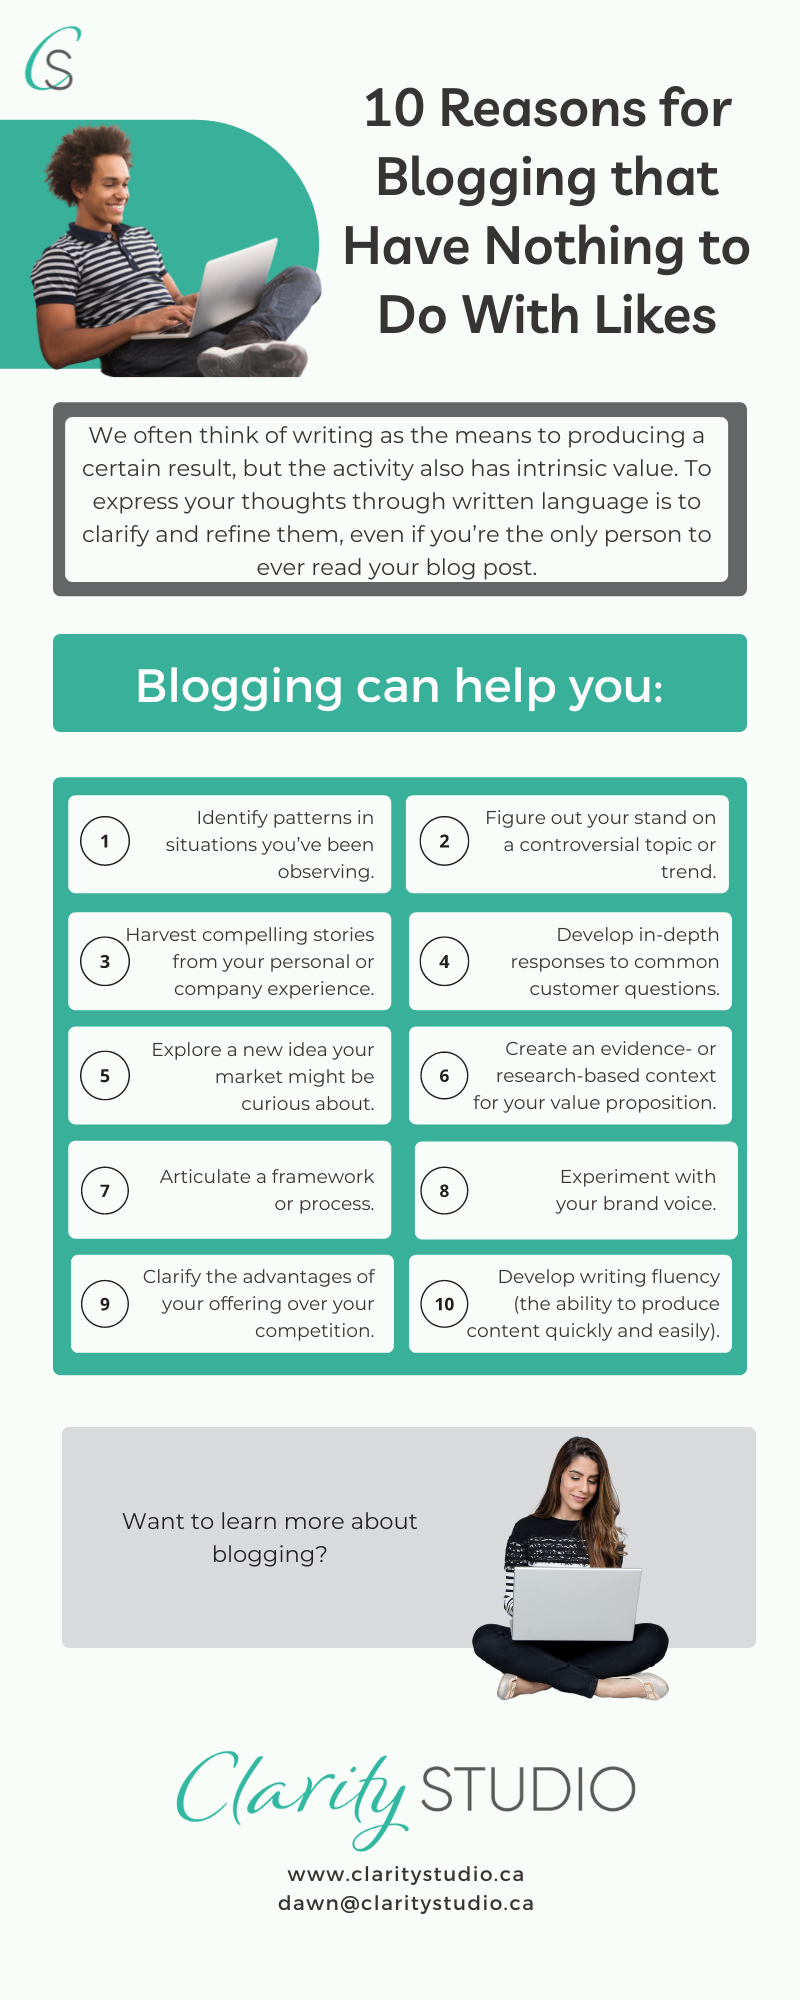 10 reasons for blogging